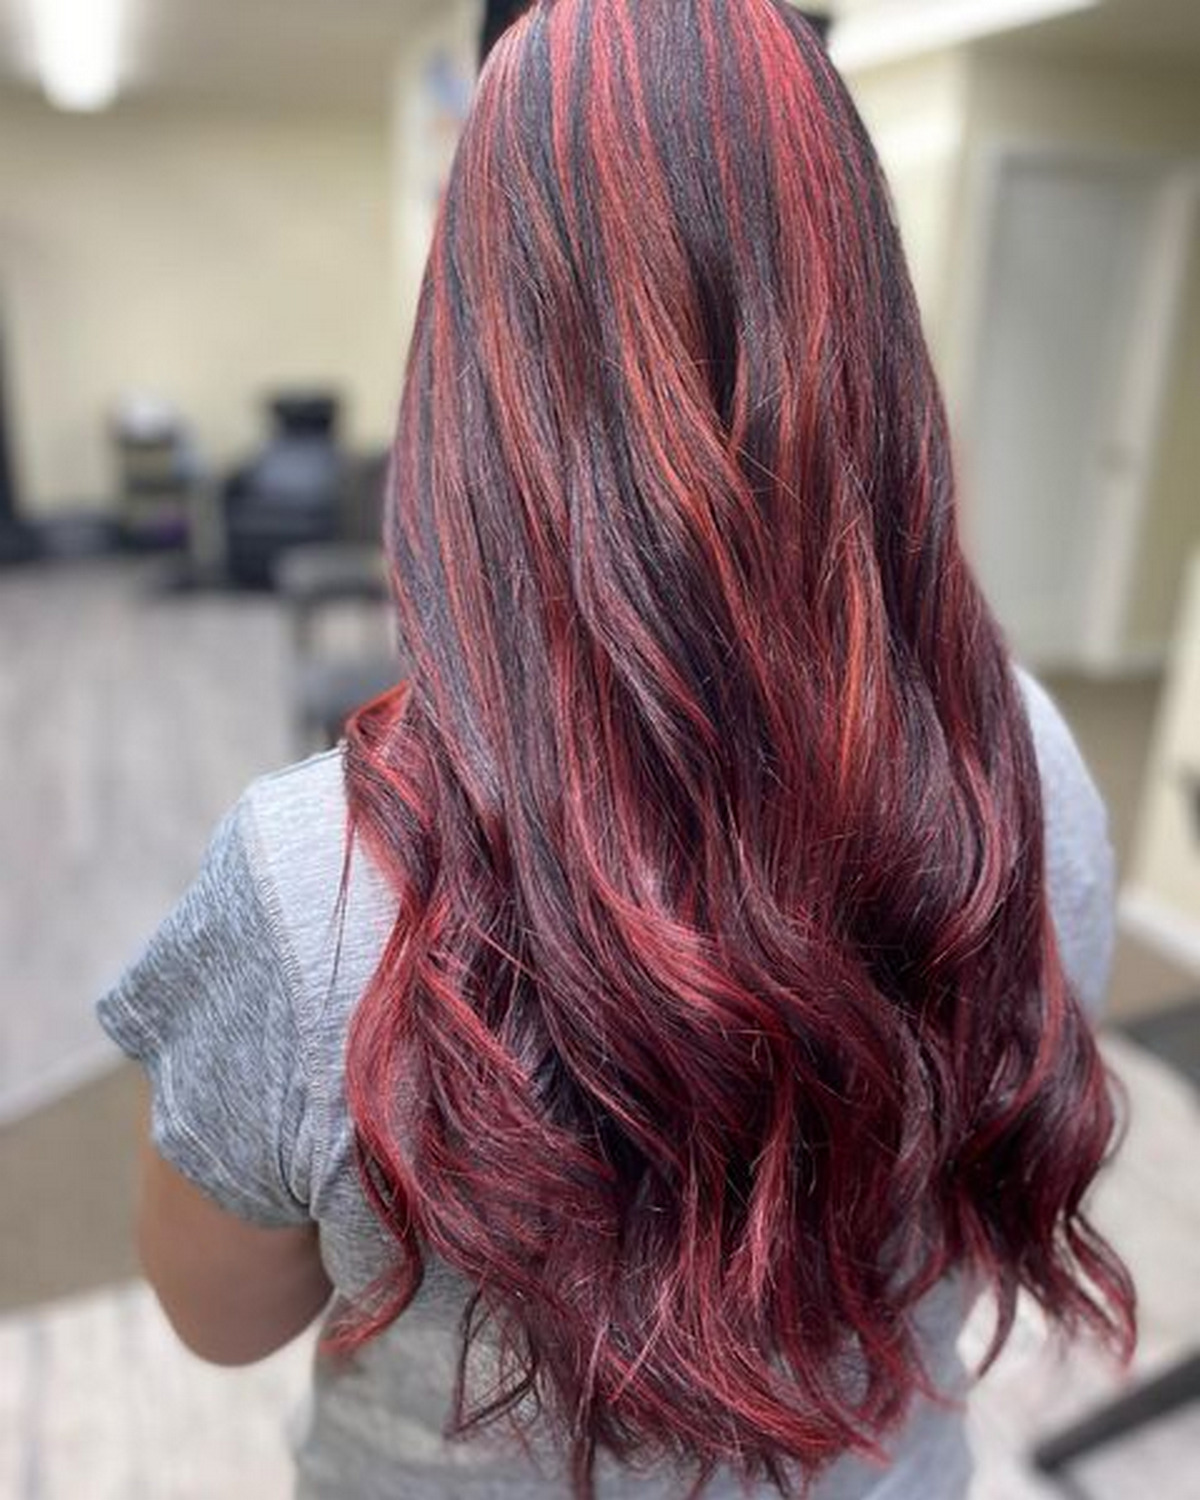 Long Gentle Black Waves With Wine Red Highlights